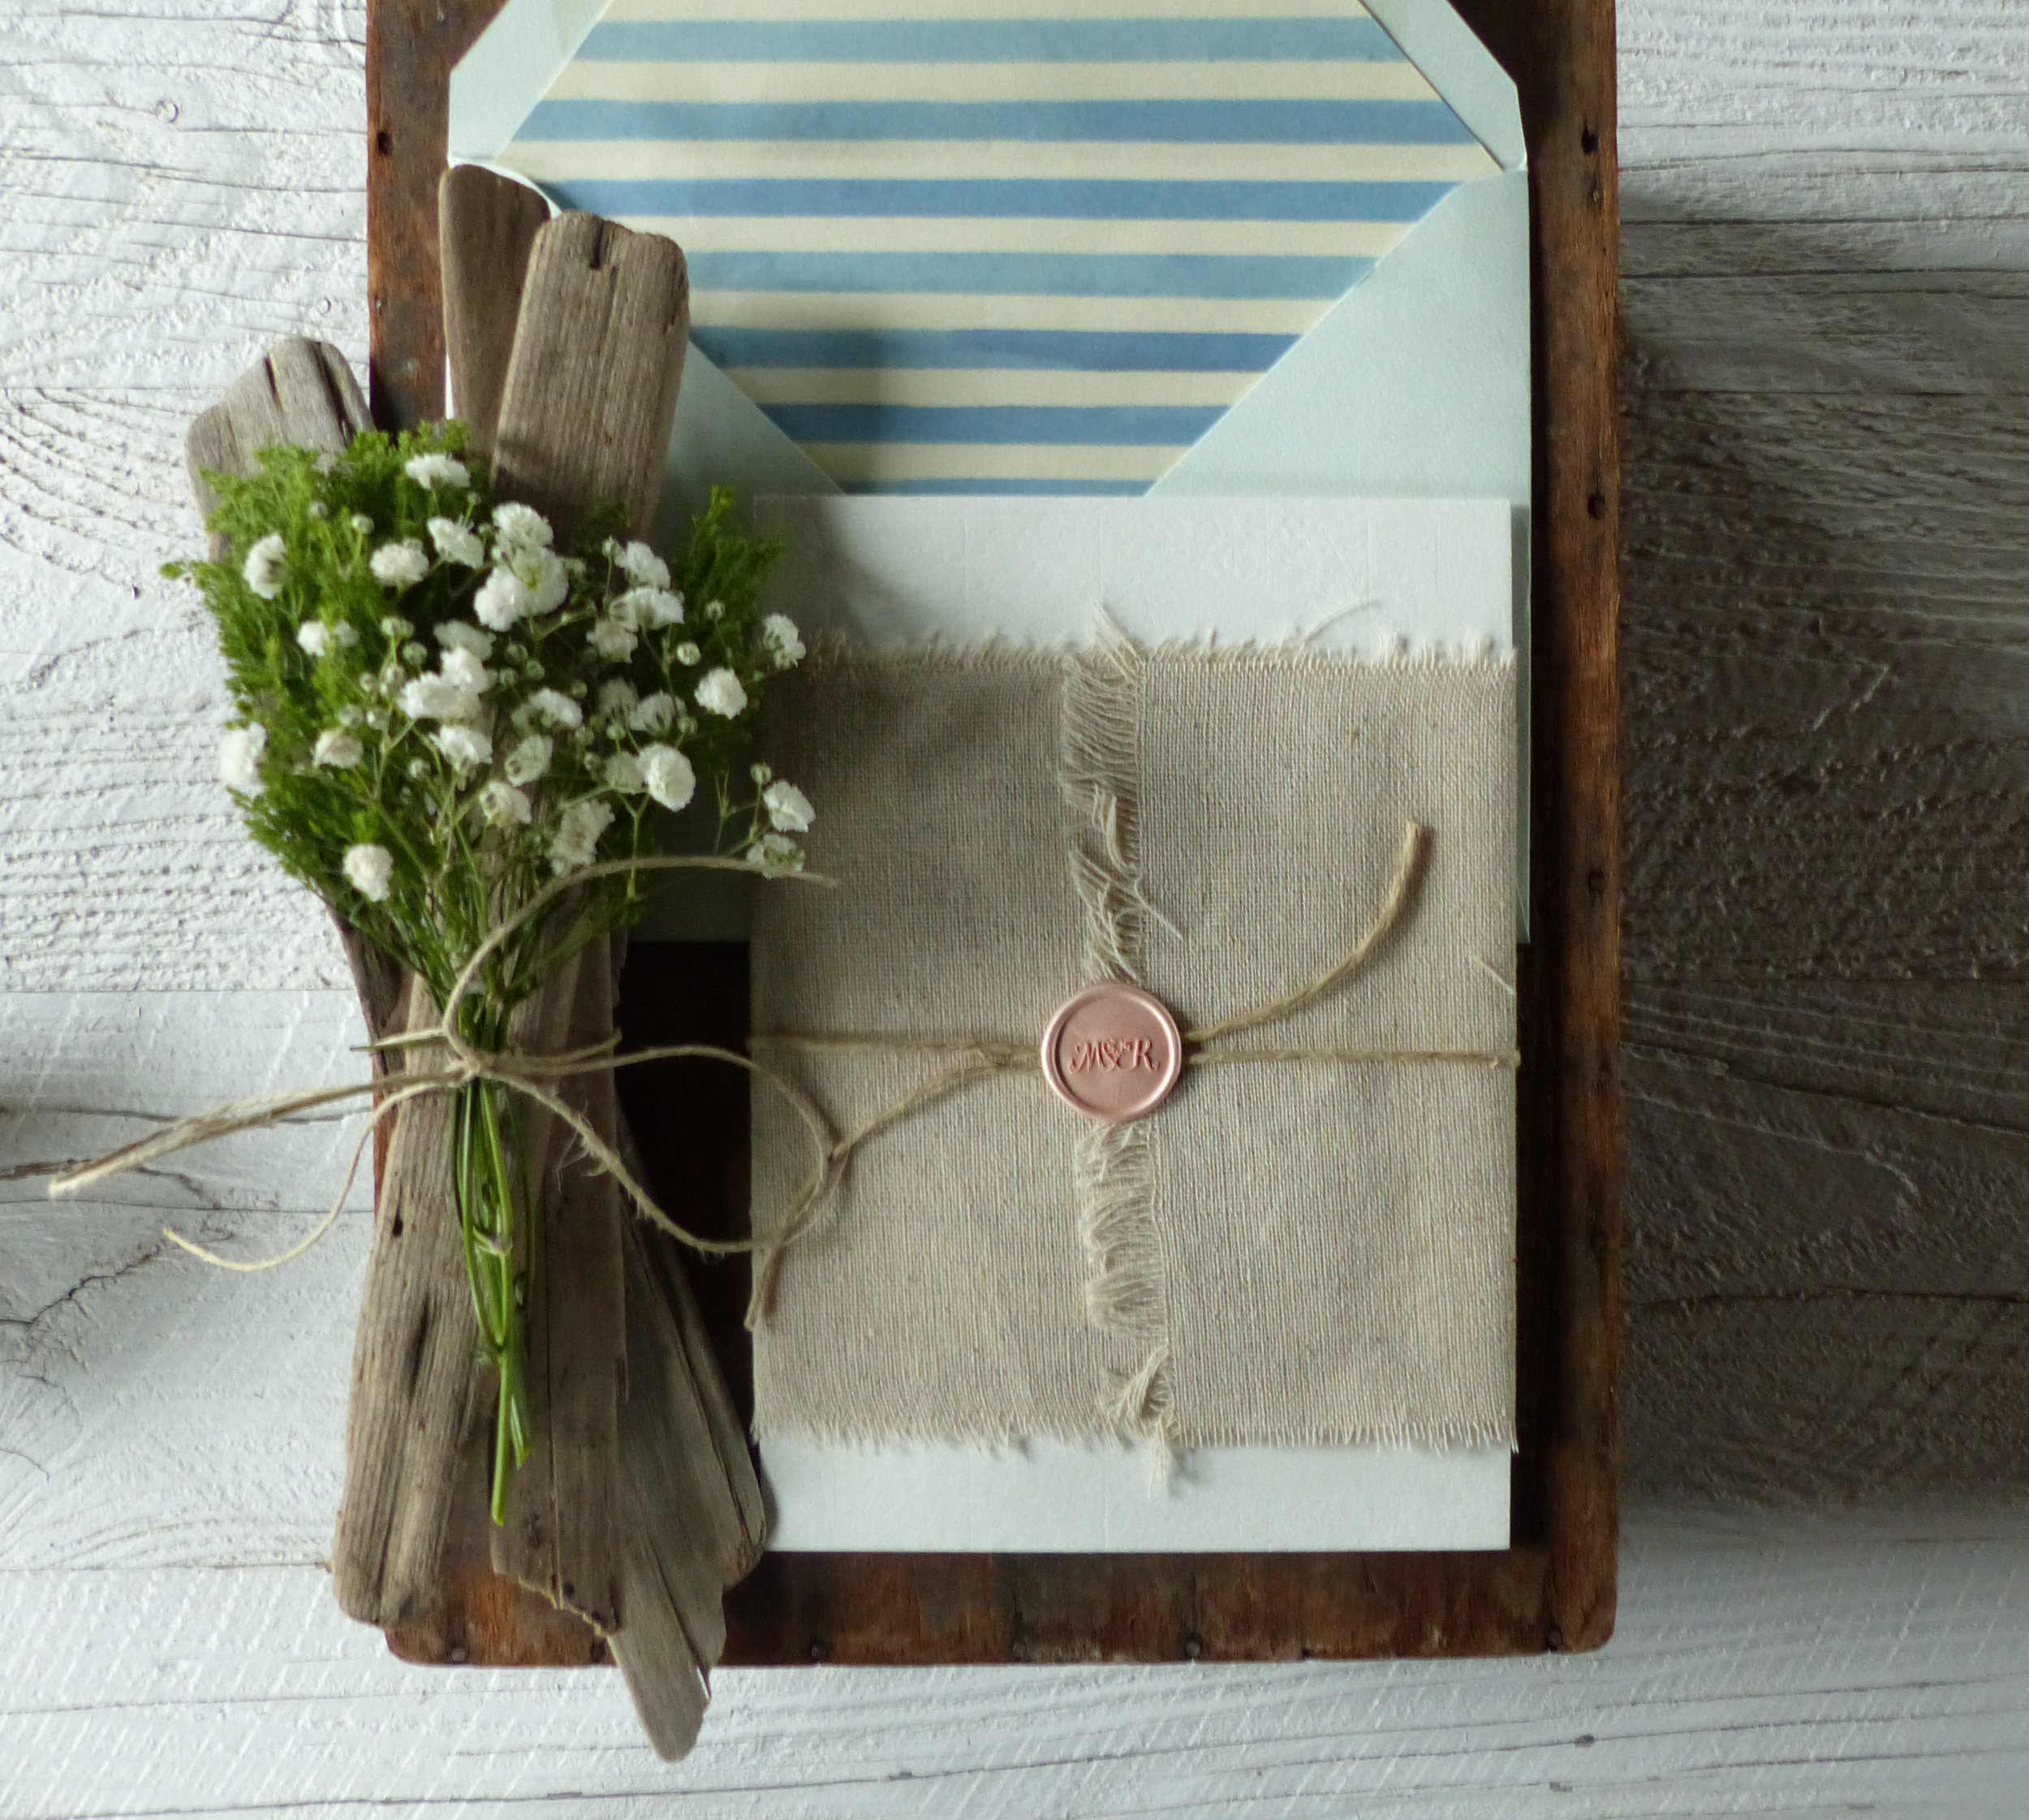  The invitation was wrapped with Belgian linen and sealed with a custom wax seal embossed with the couple's monogram.&nbsp; 